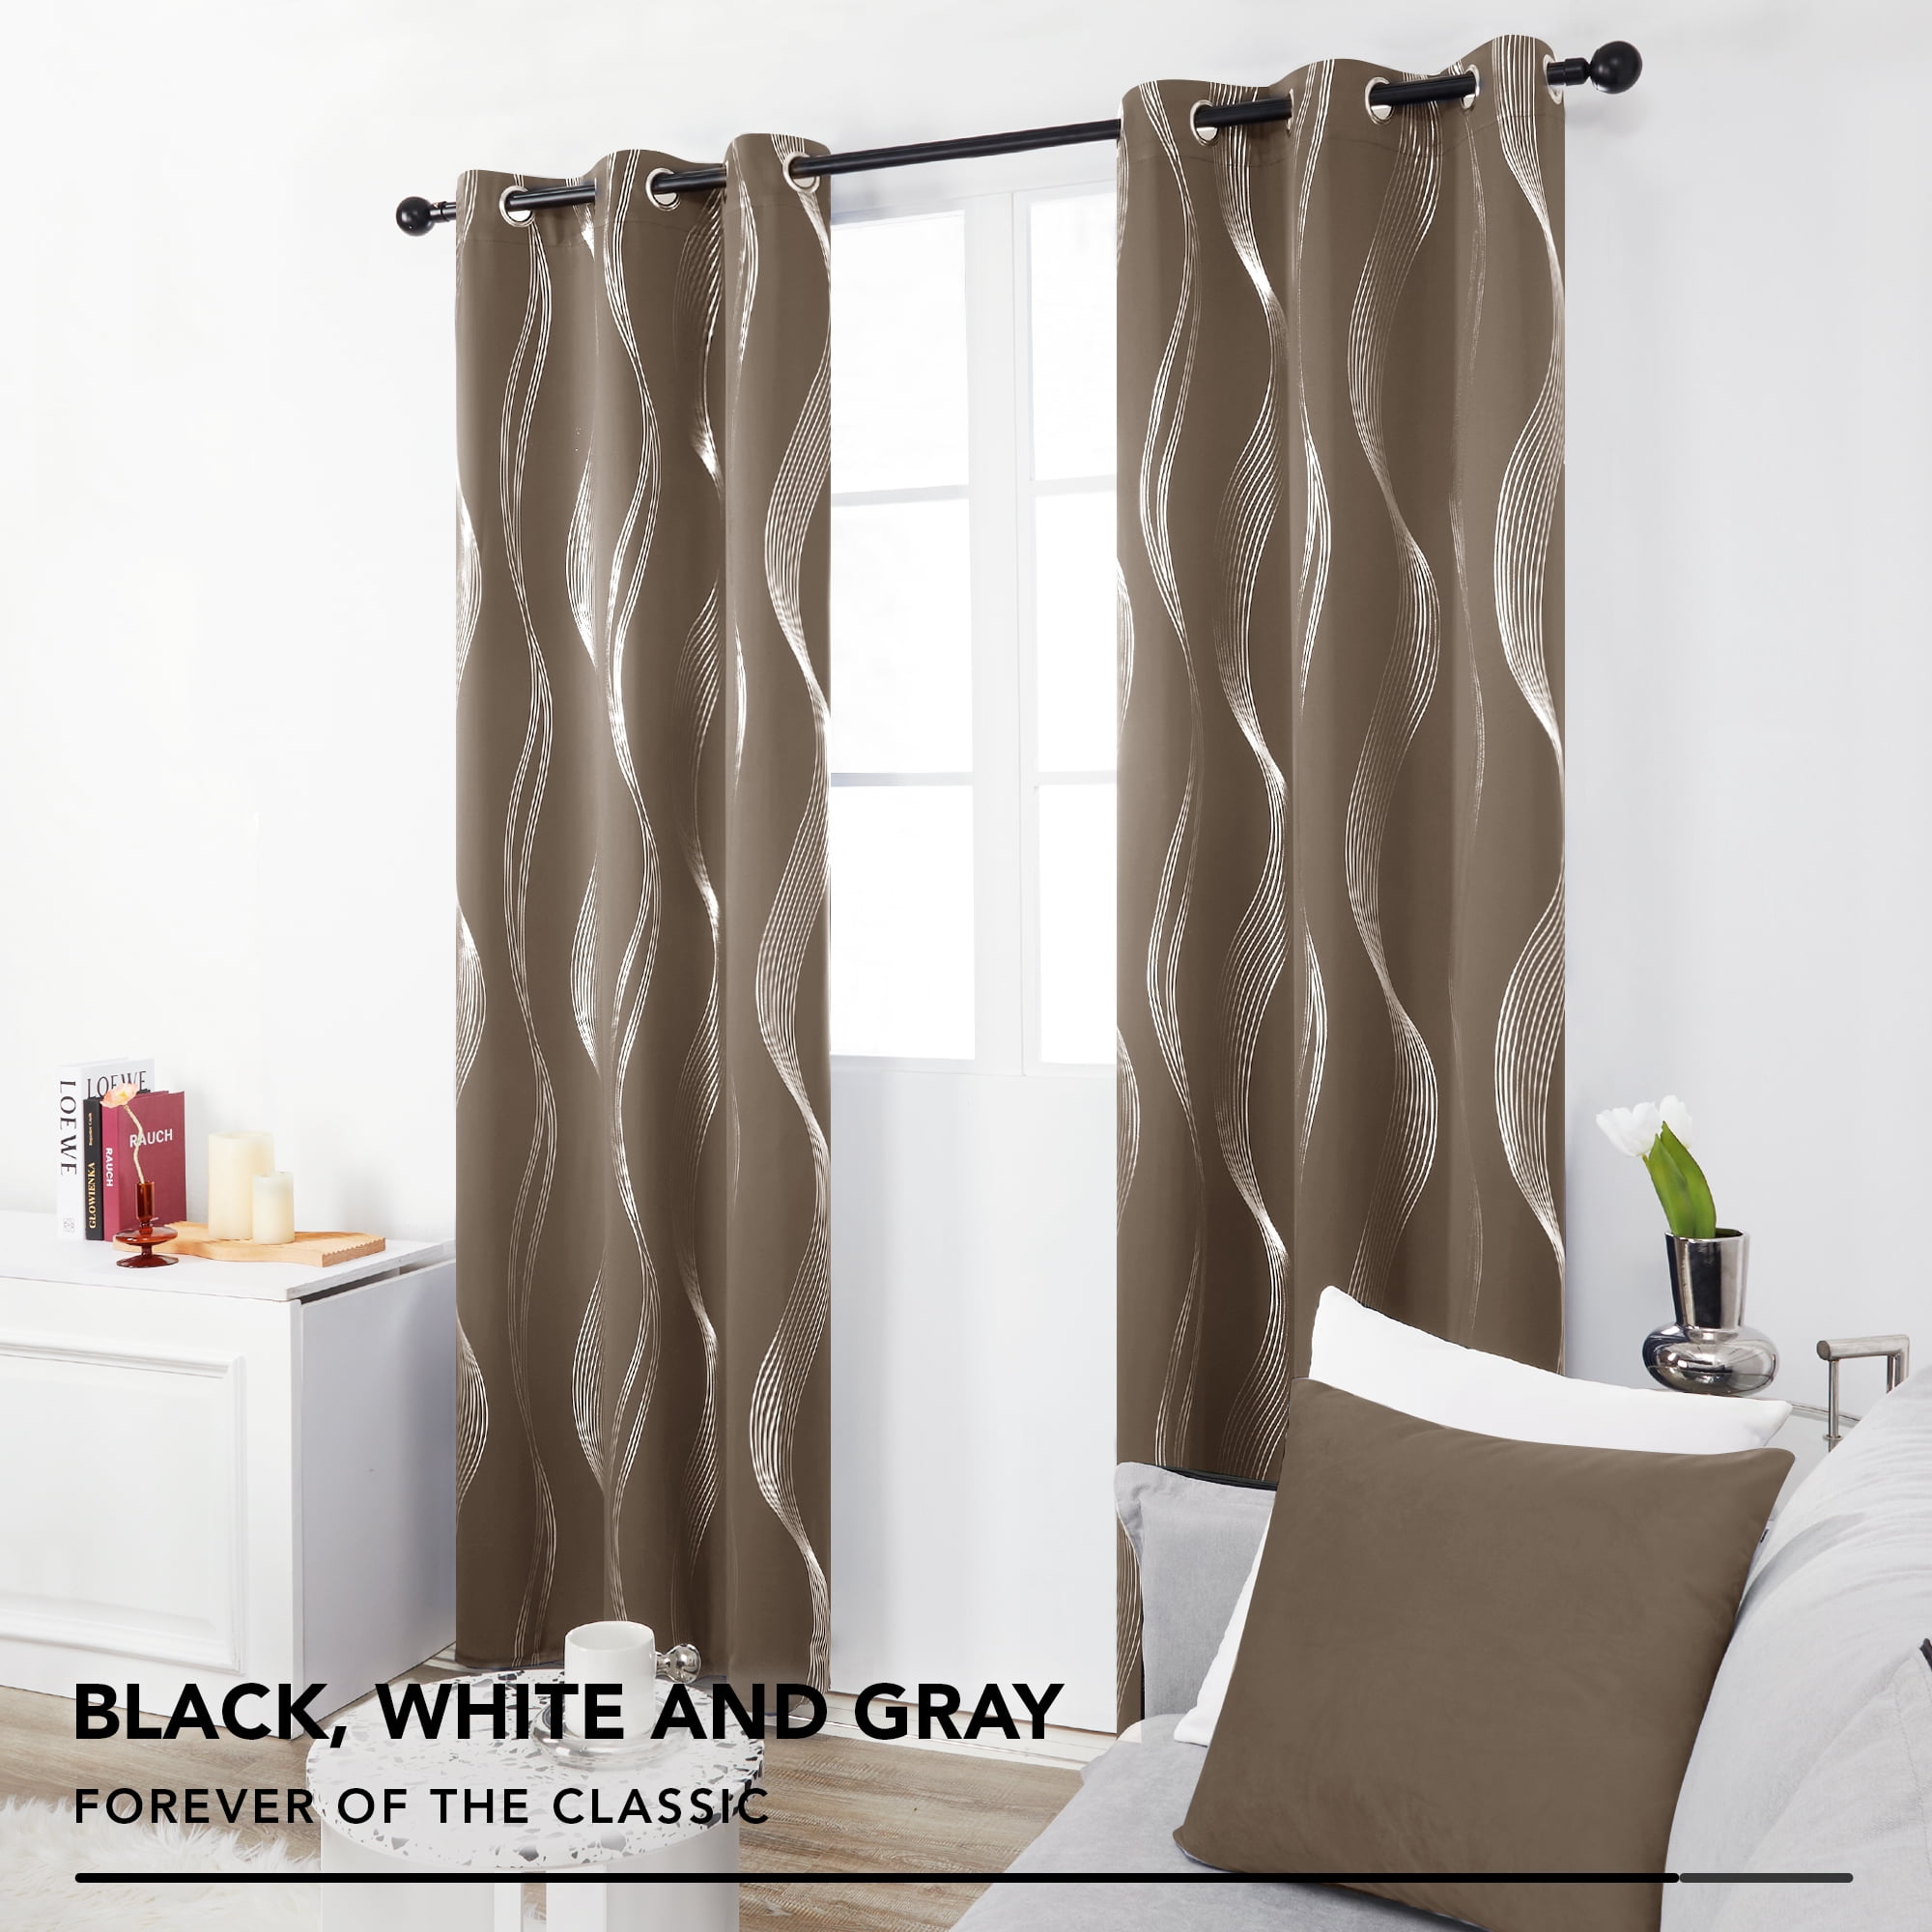 Deconovo Light Reflecting Curtains Eyelet Curtains with Silver Lining Thermal Insulated Curtains for Bedroom W52 xL84 Dark Khaki Two Panels 